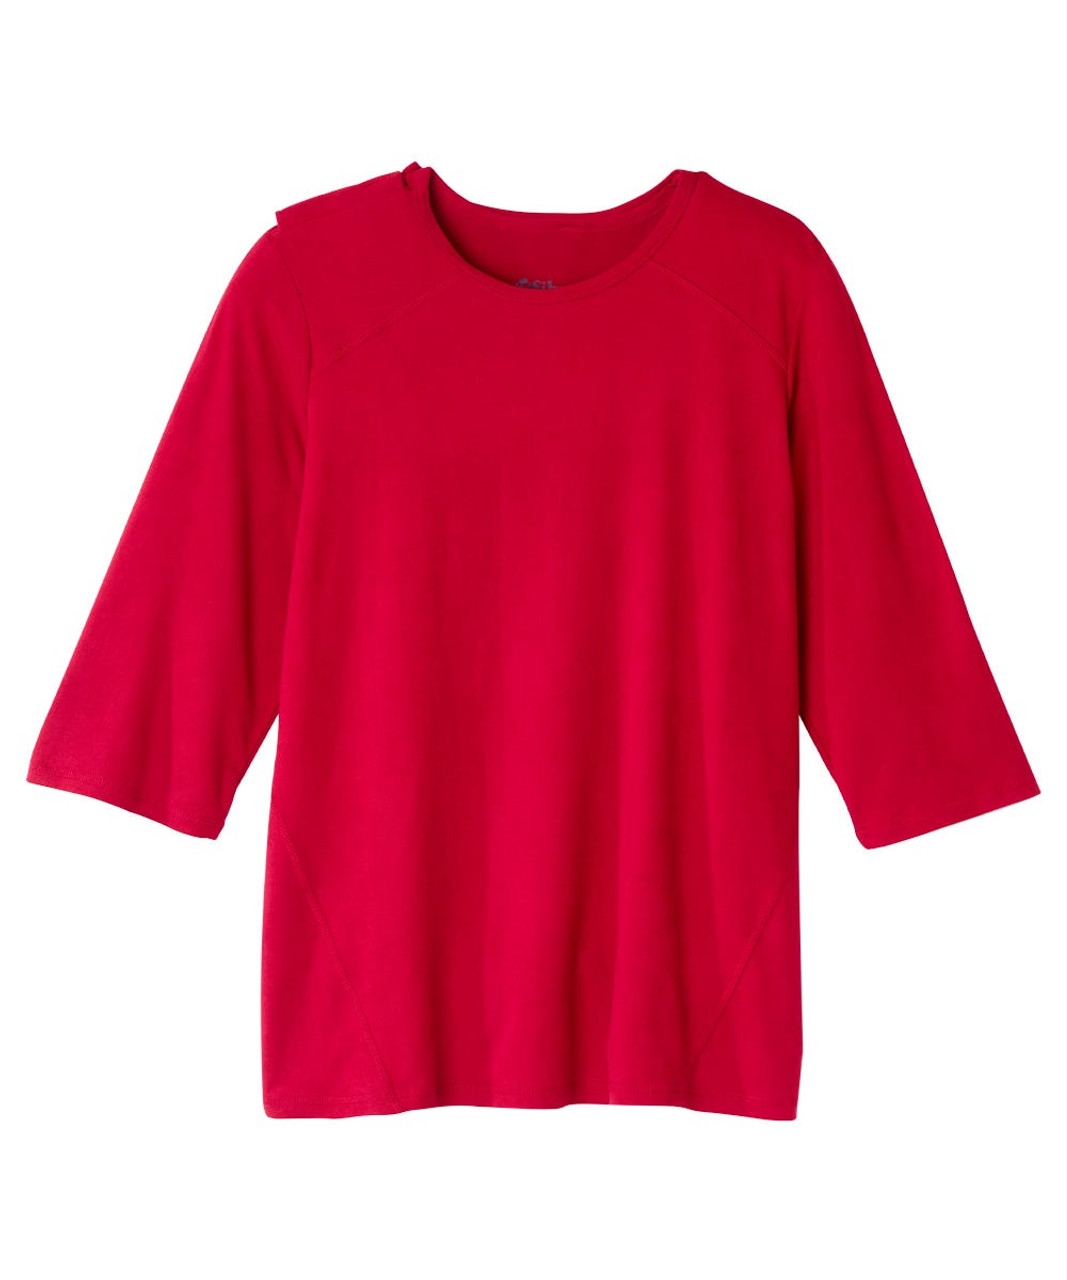 Silverts SV139 Senior Women's Active Crew Neck Open Back Top Red, Size=3XL, SV139-SV31-3XL